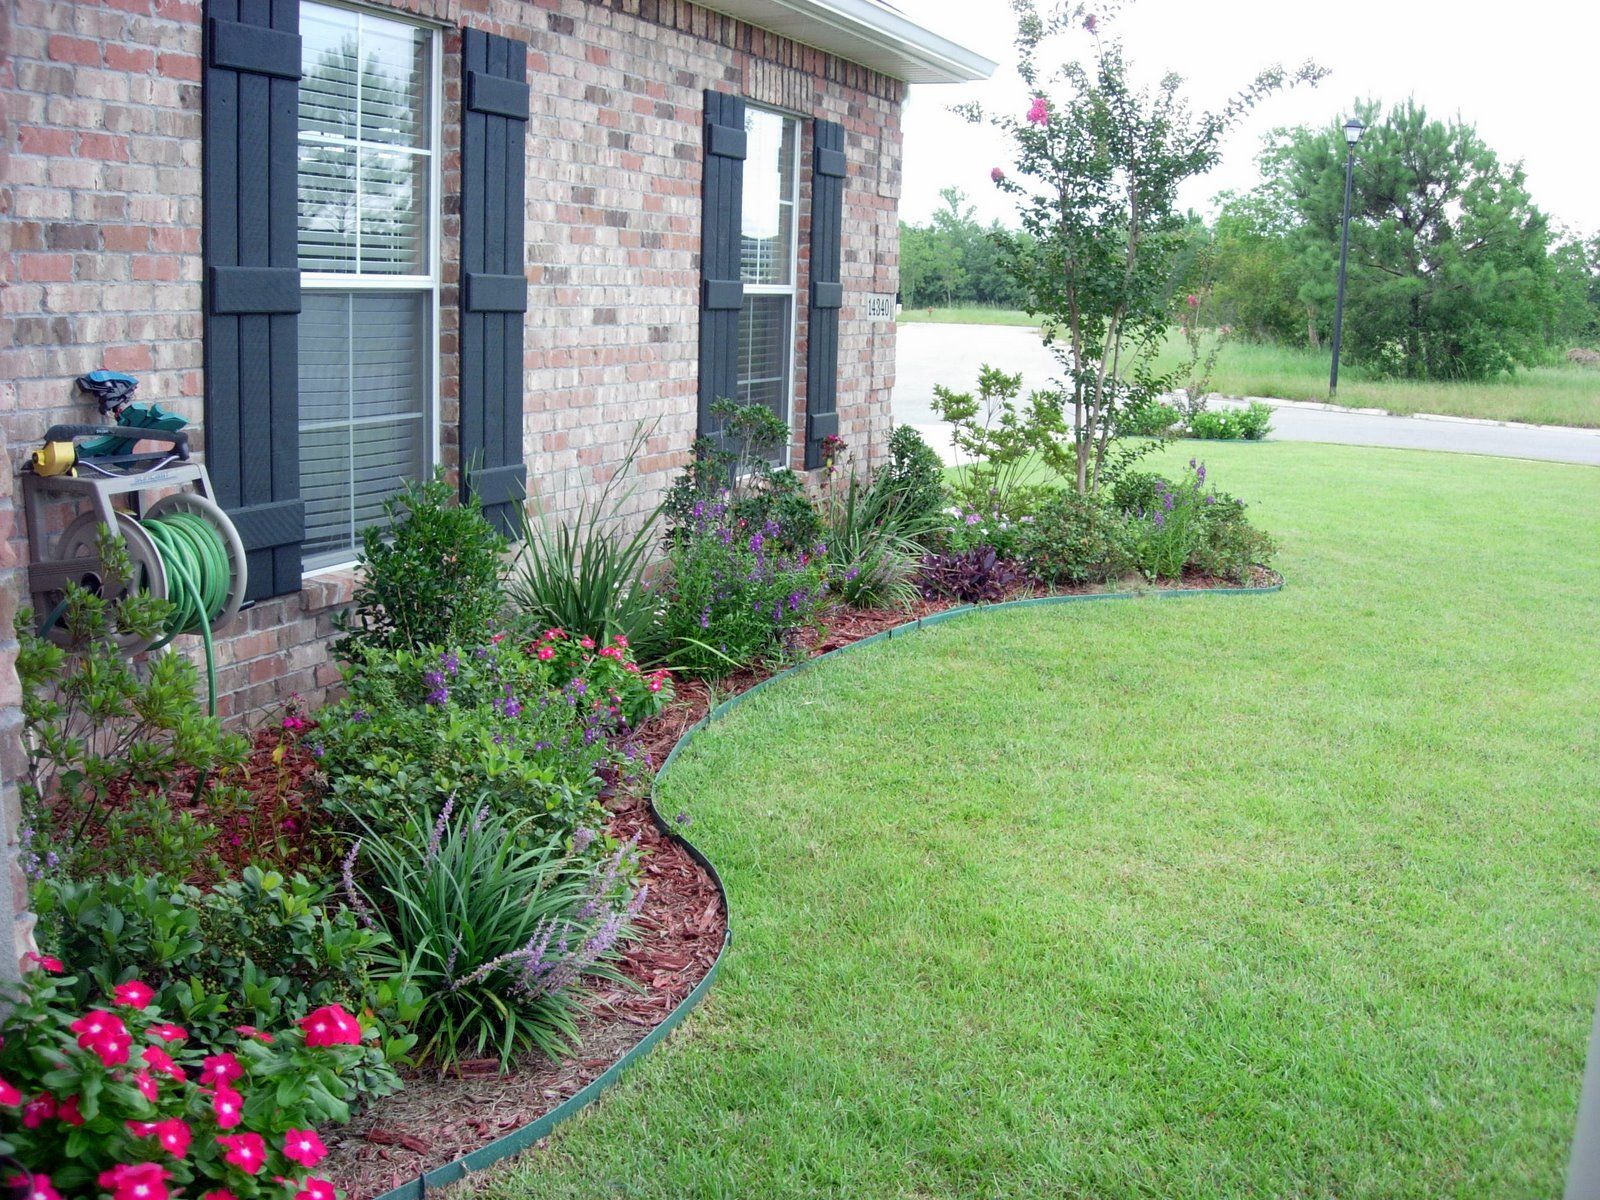 flower bed designs for front of house | Use shrubs /small trees to ...